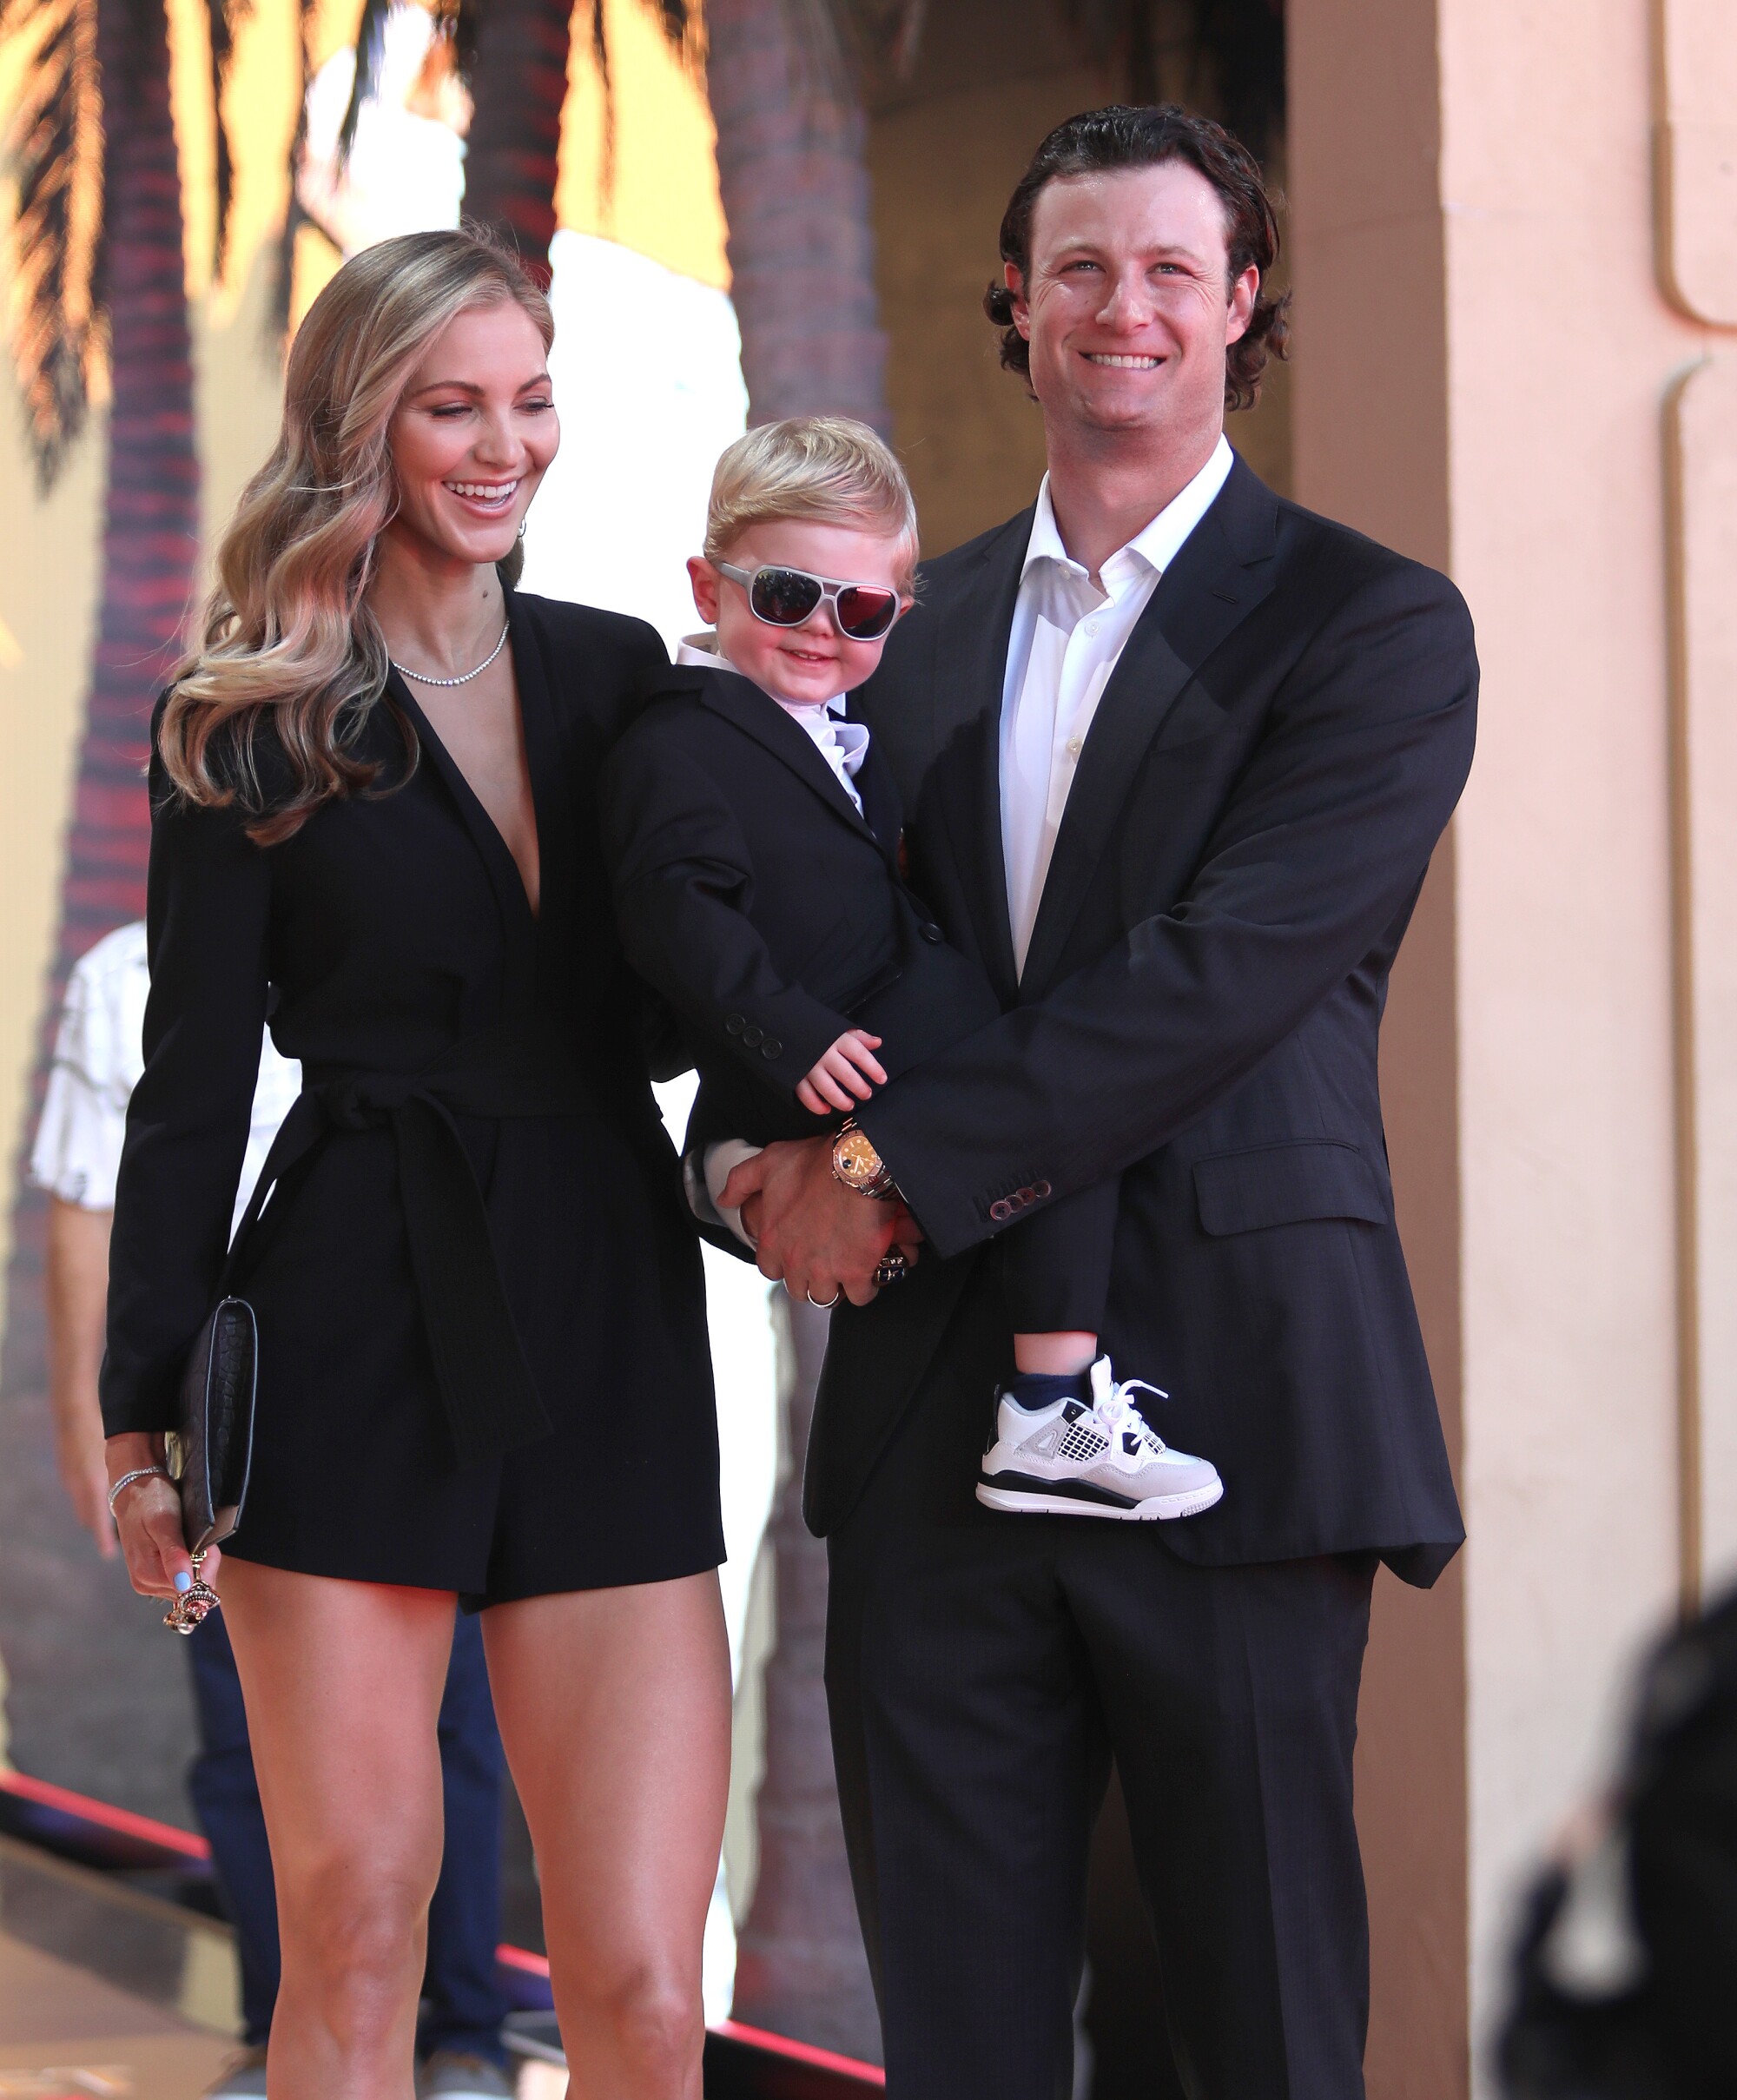 New York Yankees pitcher Gerrit Cole arrives with his family at the 2022 MLB All-Star Game Red Carpet Show.